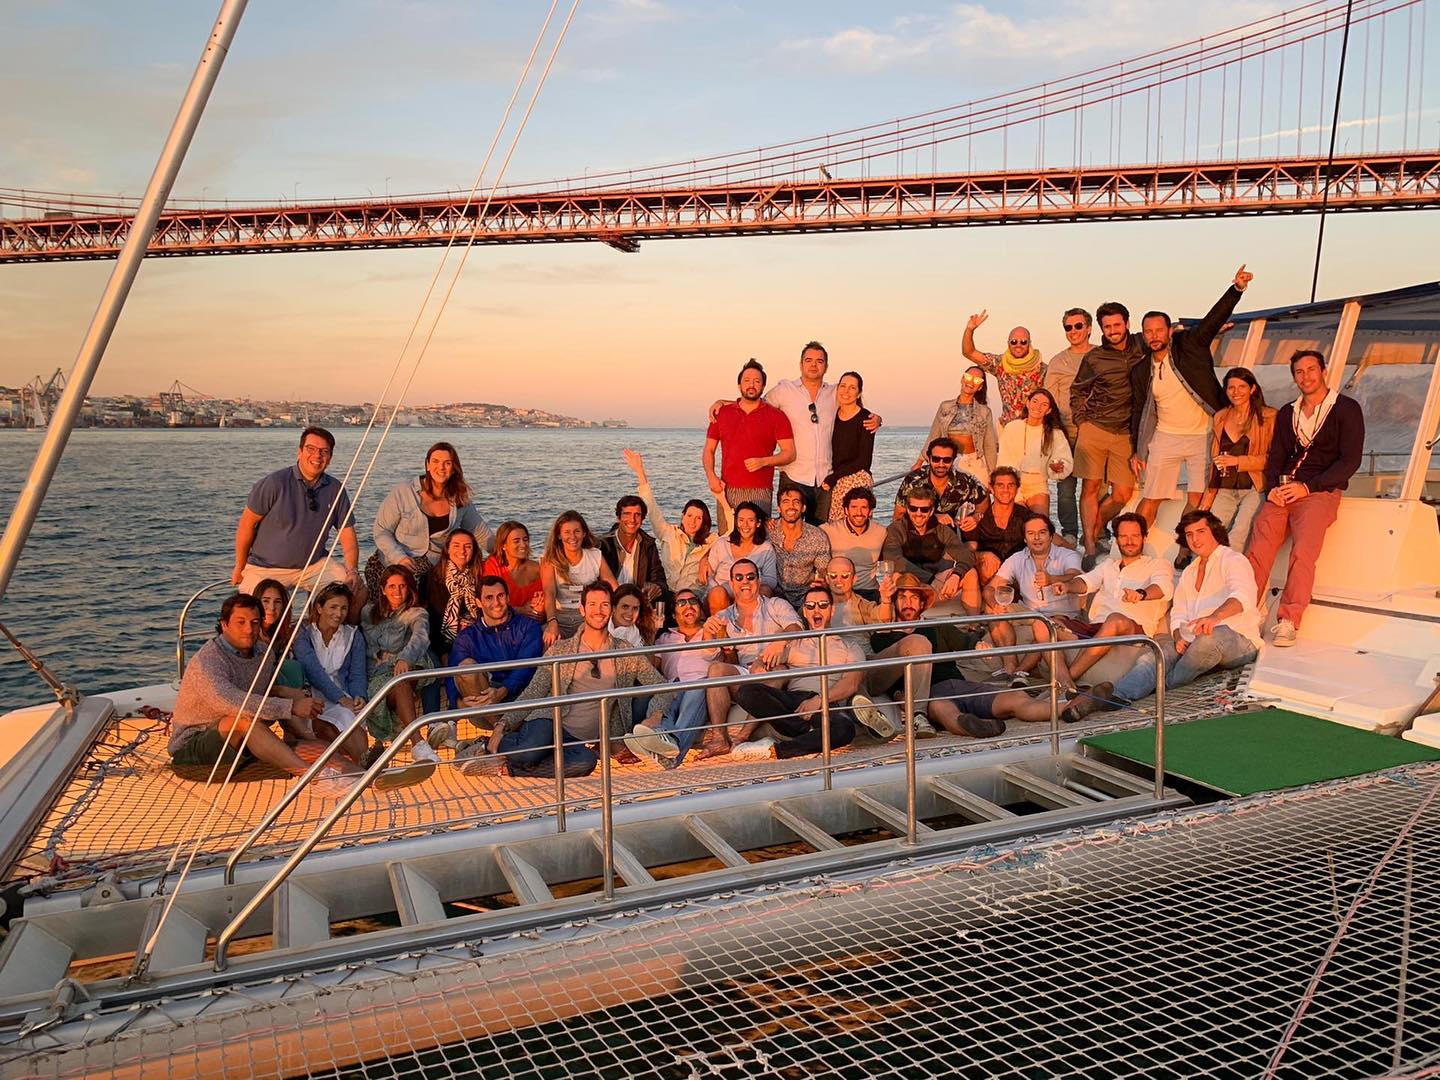 Bring all your friends together onboard in Lisbon